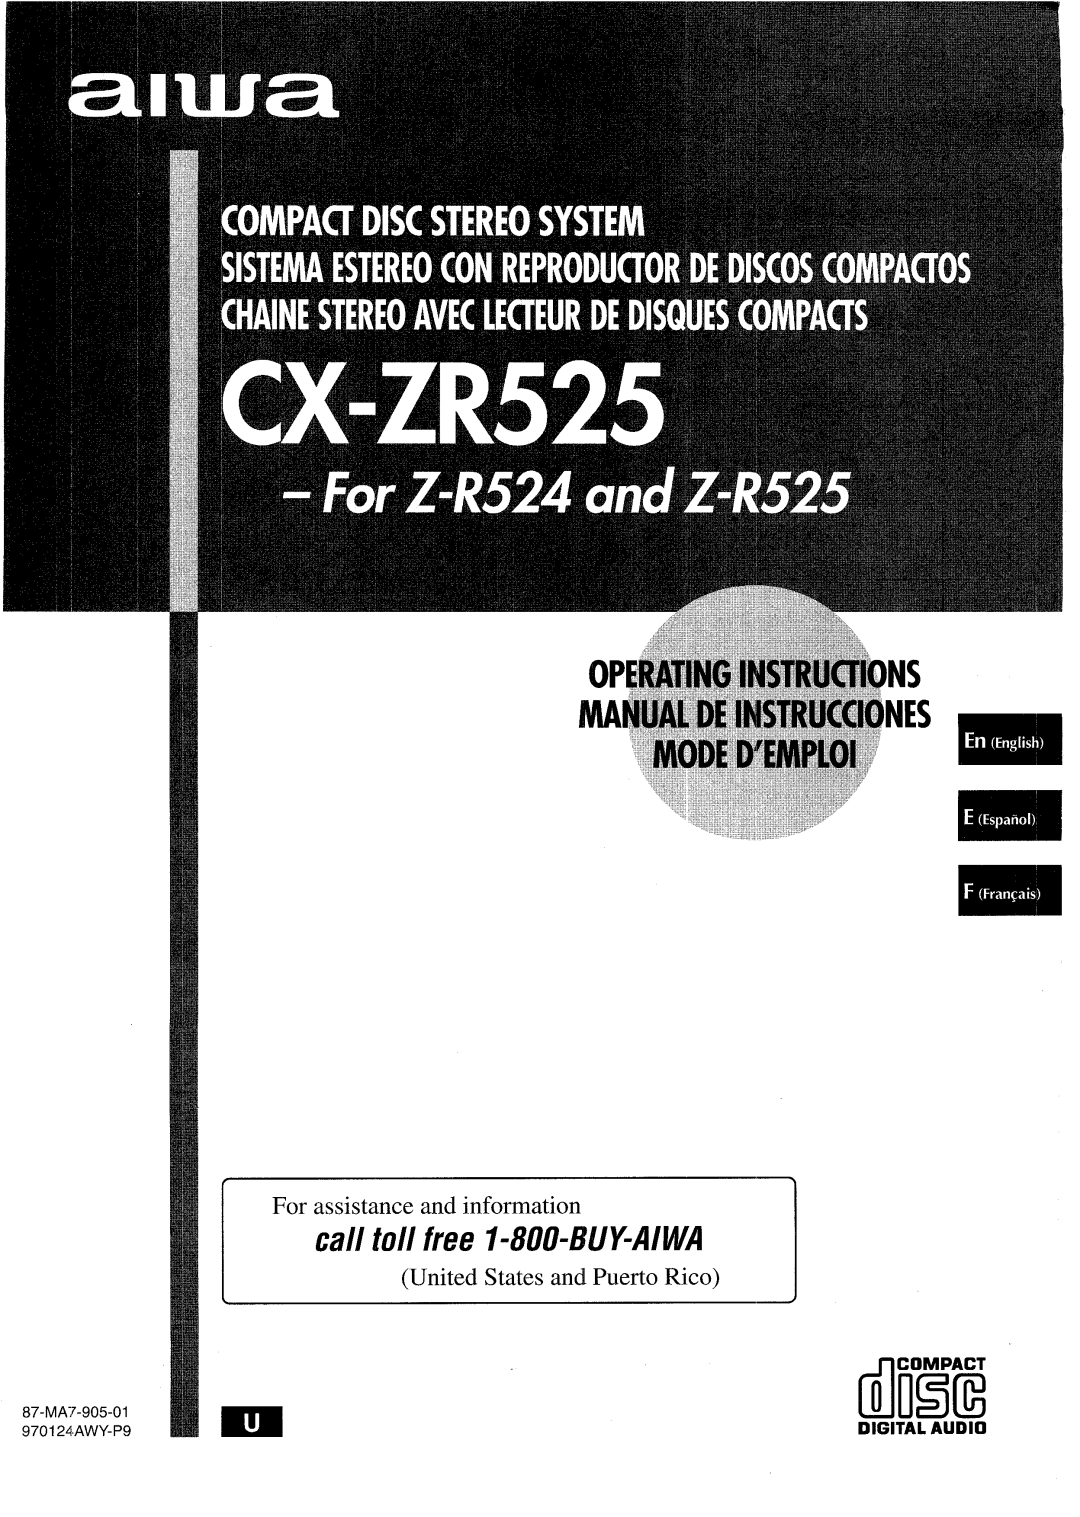 Sony CX-ZR525 manual I For assistance and information, United States and Puerto Rico, Digital Audio, dlrlEiiE 